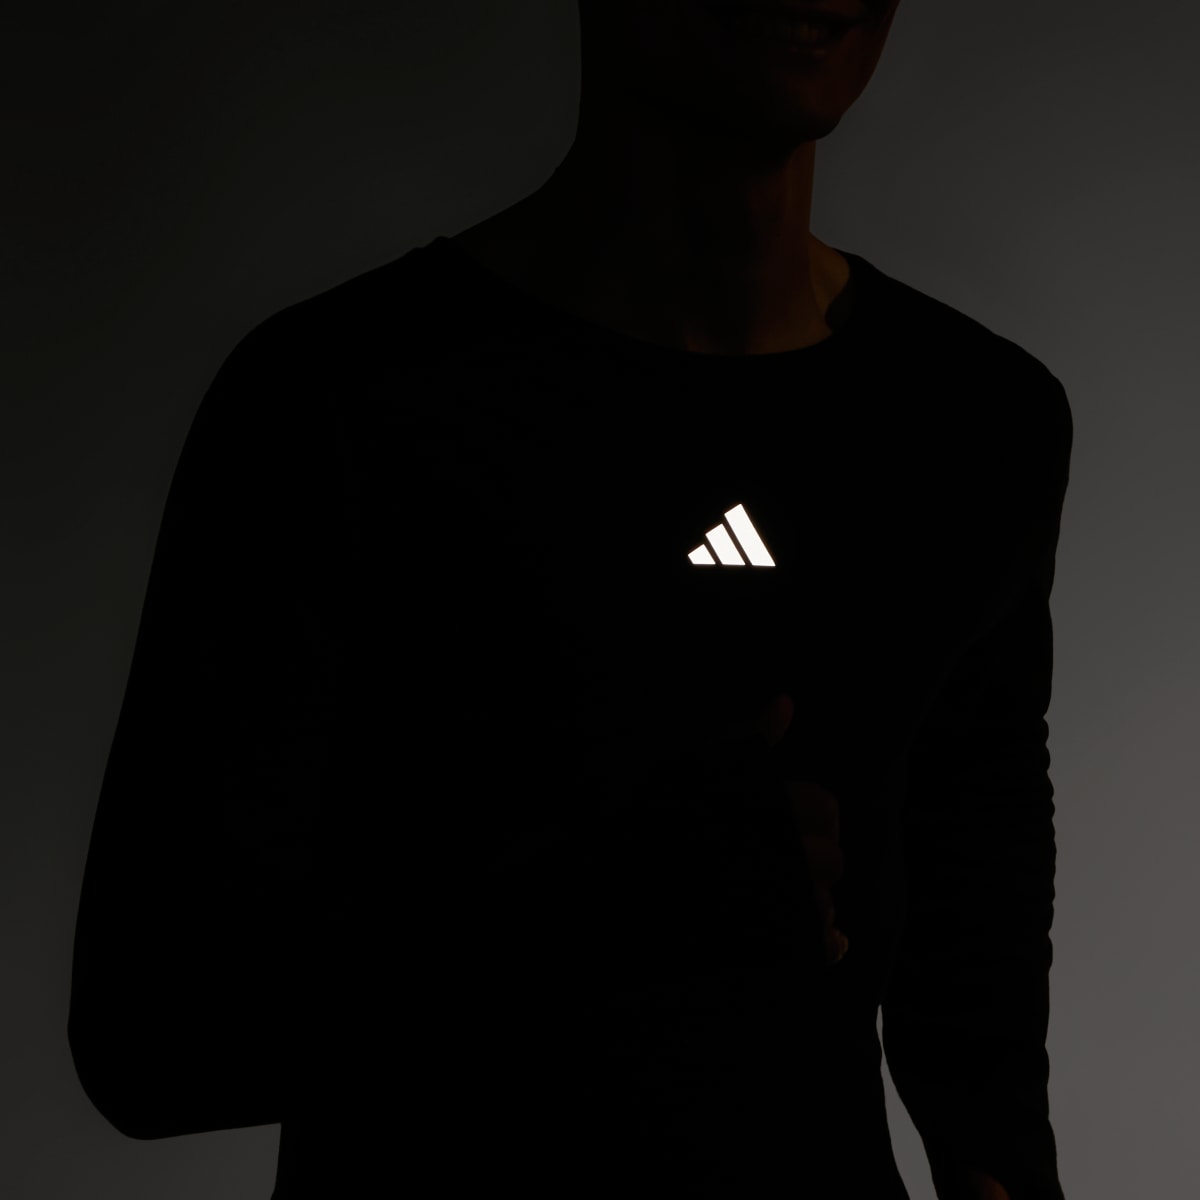 Adidas Ultimate Running Conquer the Elements Merino Longsleeve. 8